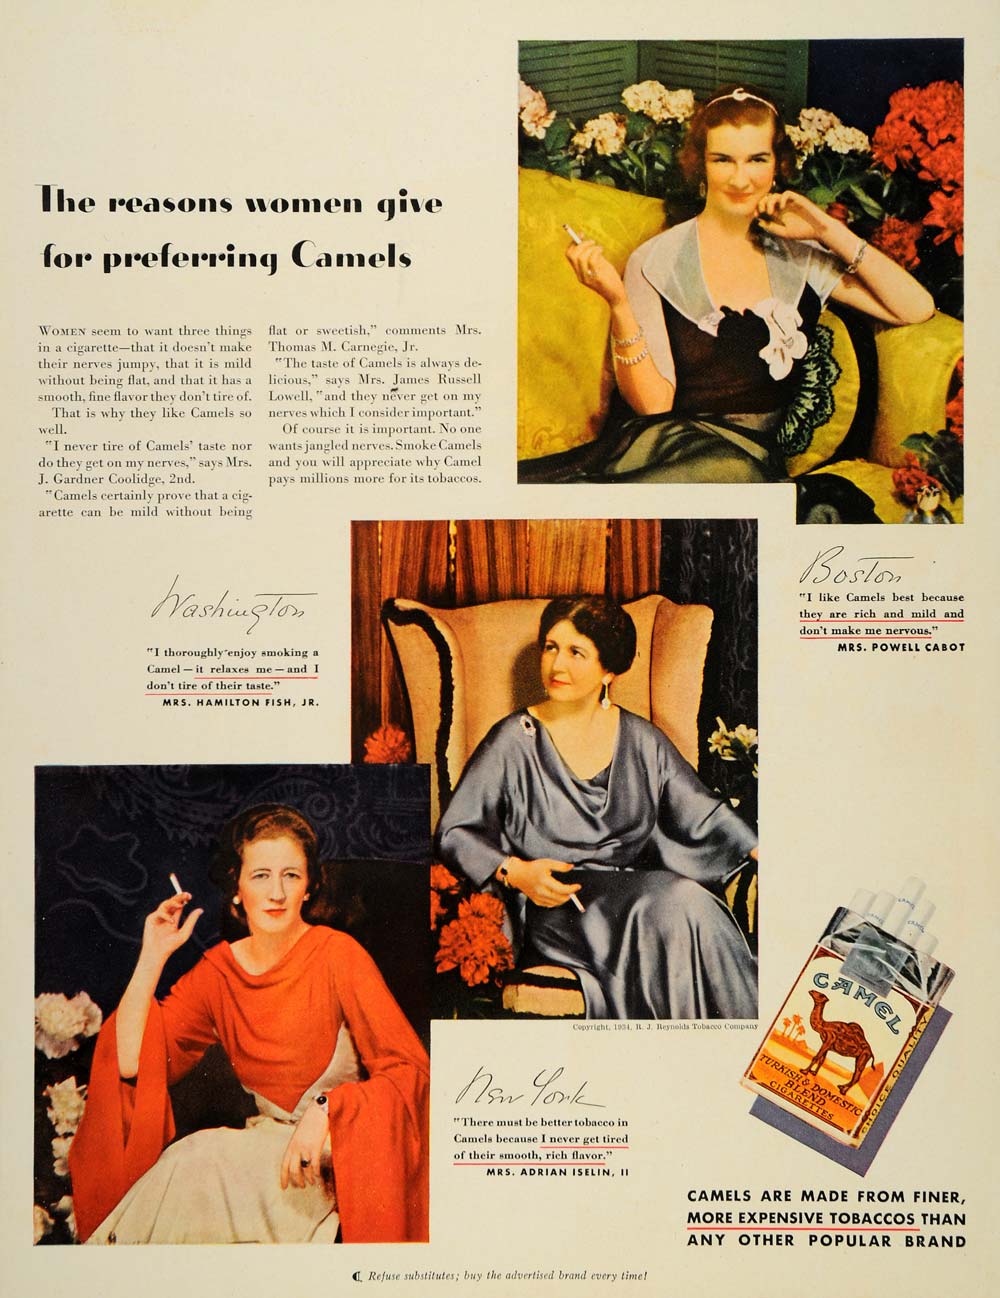 1934 Ad Camel Cigarettes R J Reynolds Tobacco Products P Cabot Women Smoking PR2